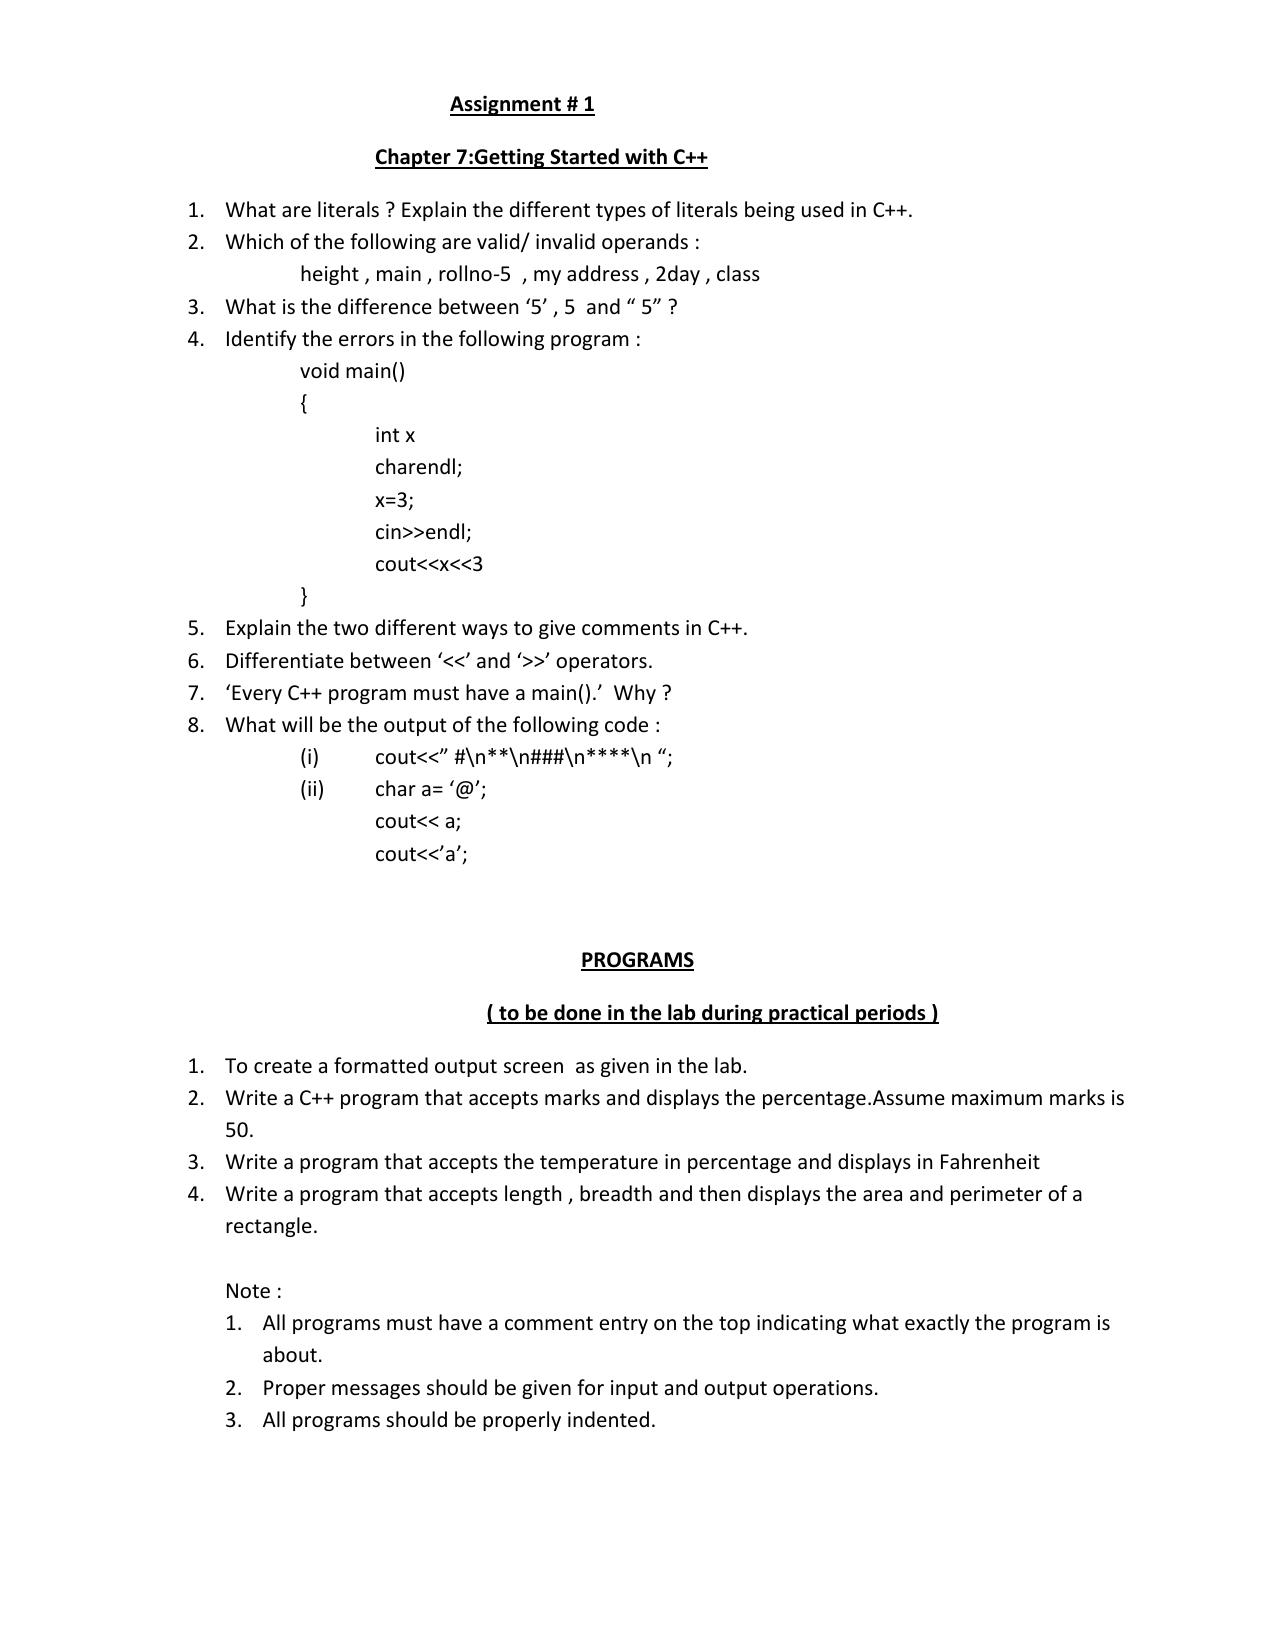 CBSE Worksheets for Class 11 Computer Science Getting Started with C++ Assignment - Page 1